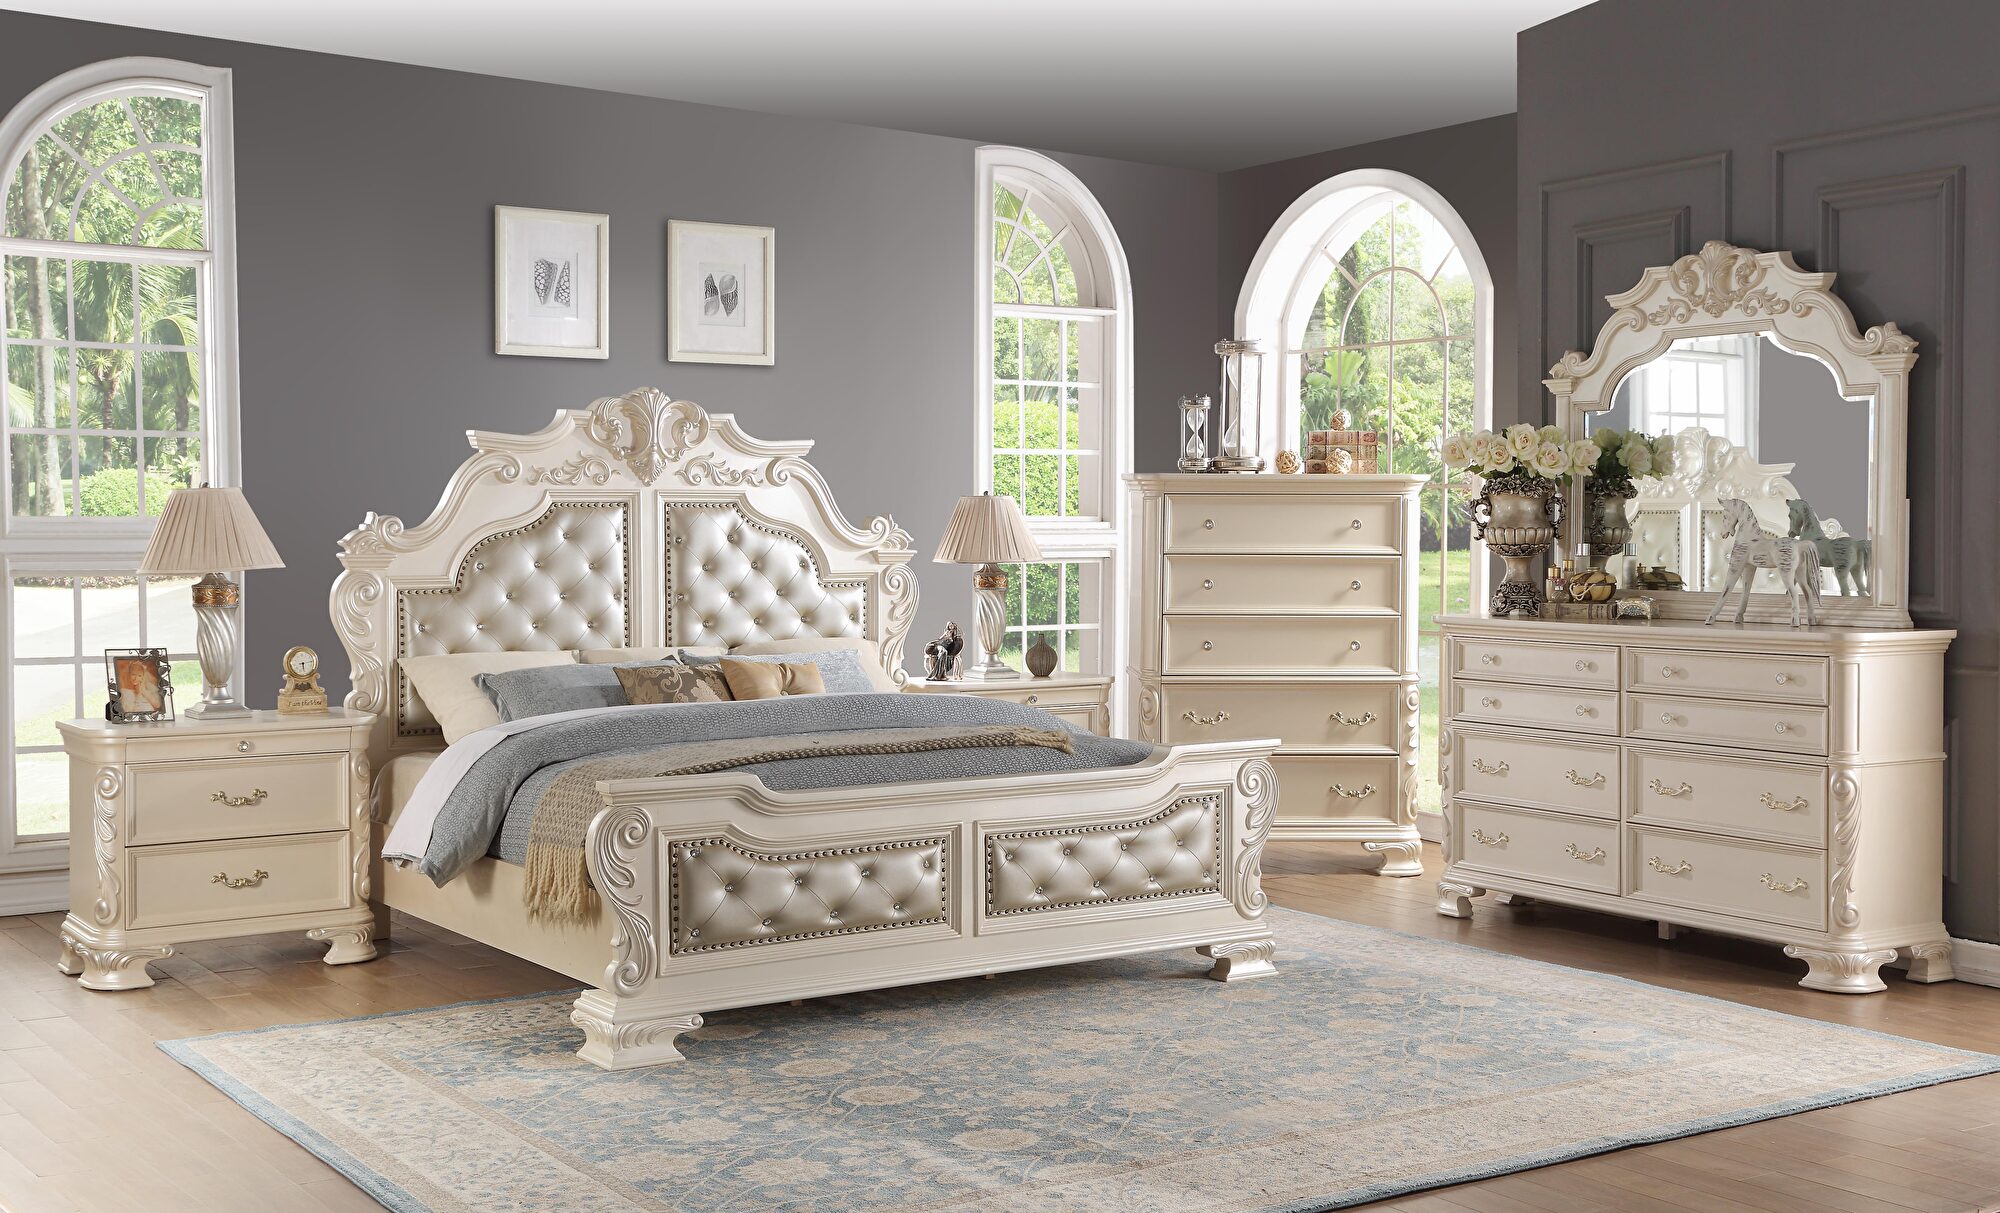 Victoria King Size Bed Cosmos Furniture, Victoria Upholstered King Bed